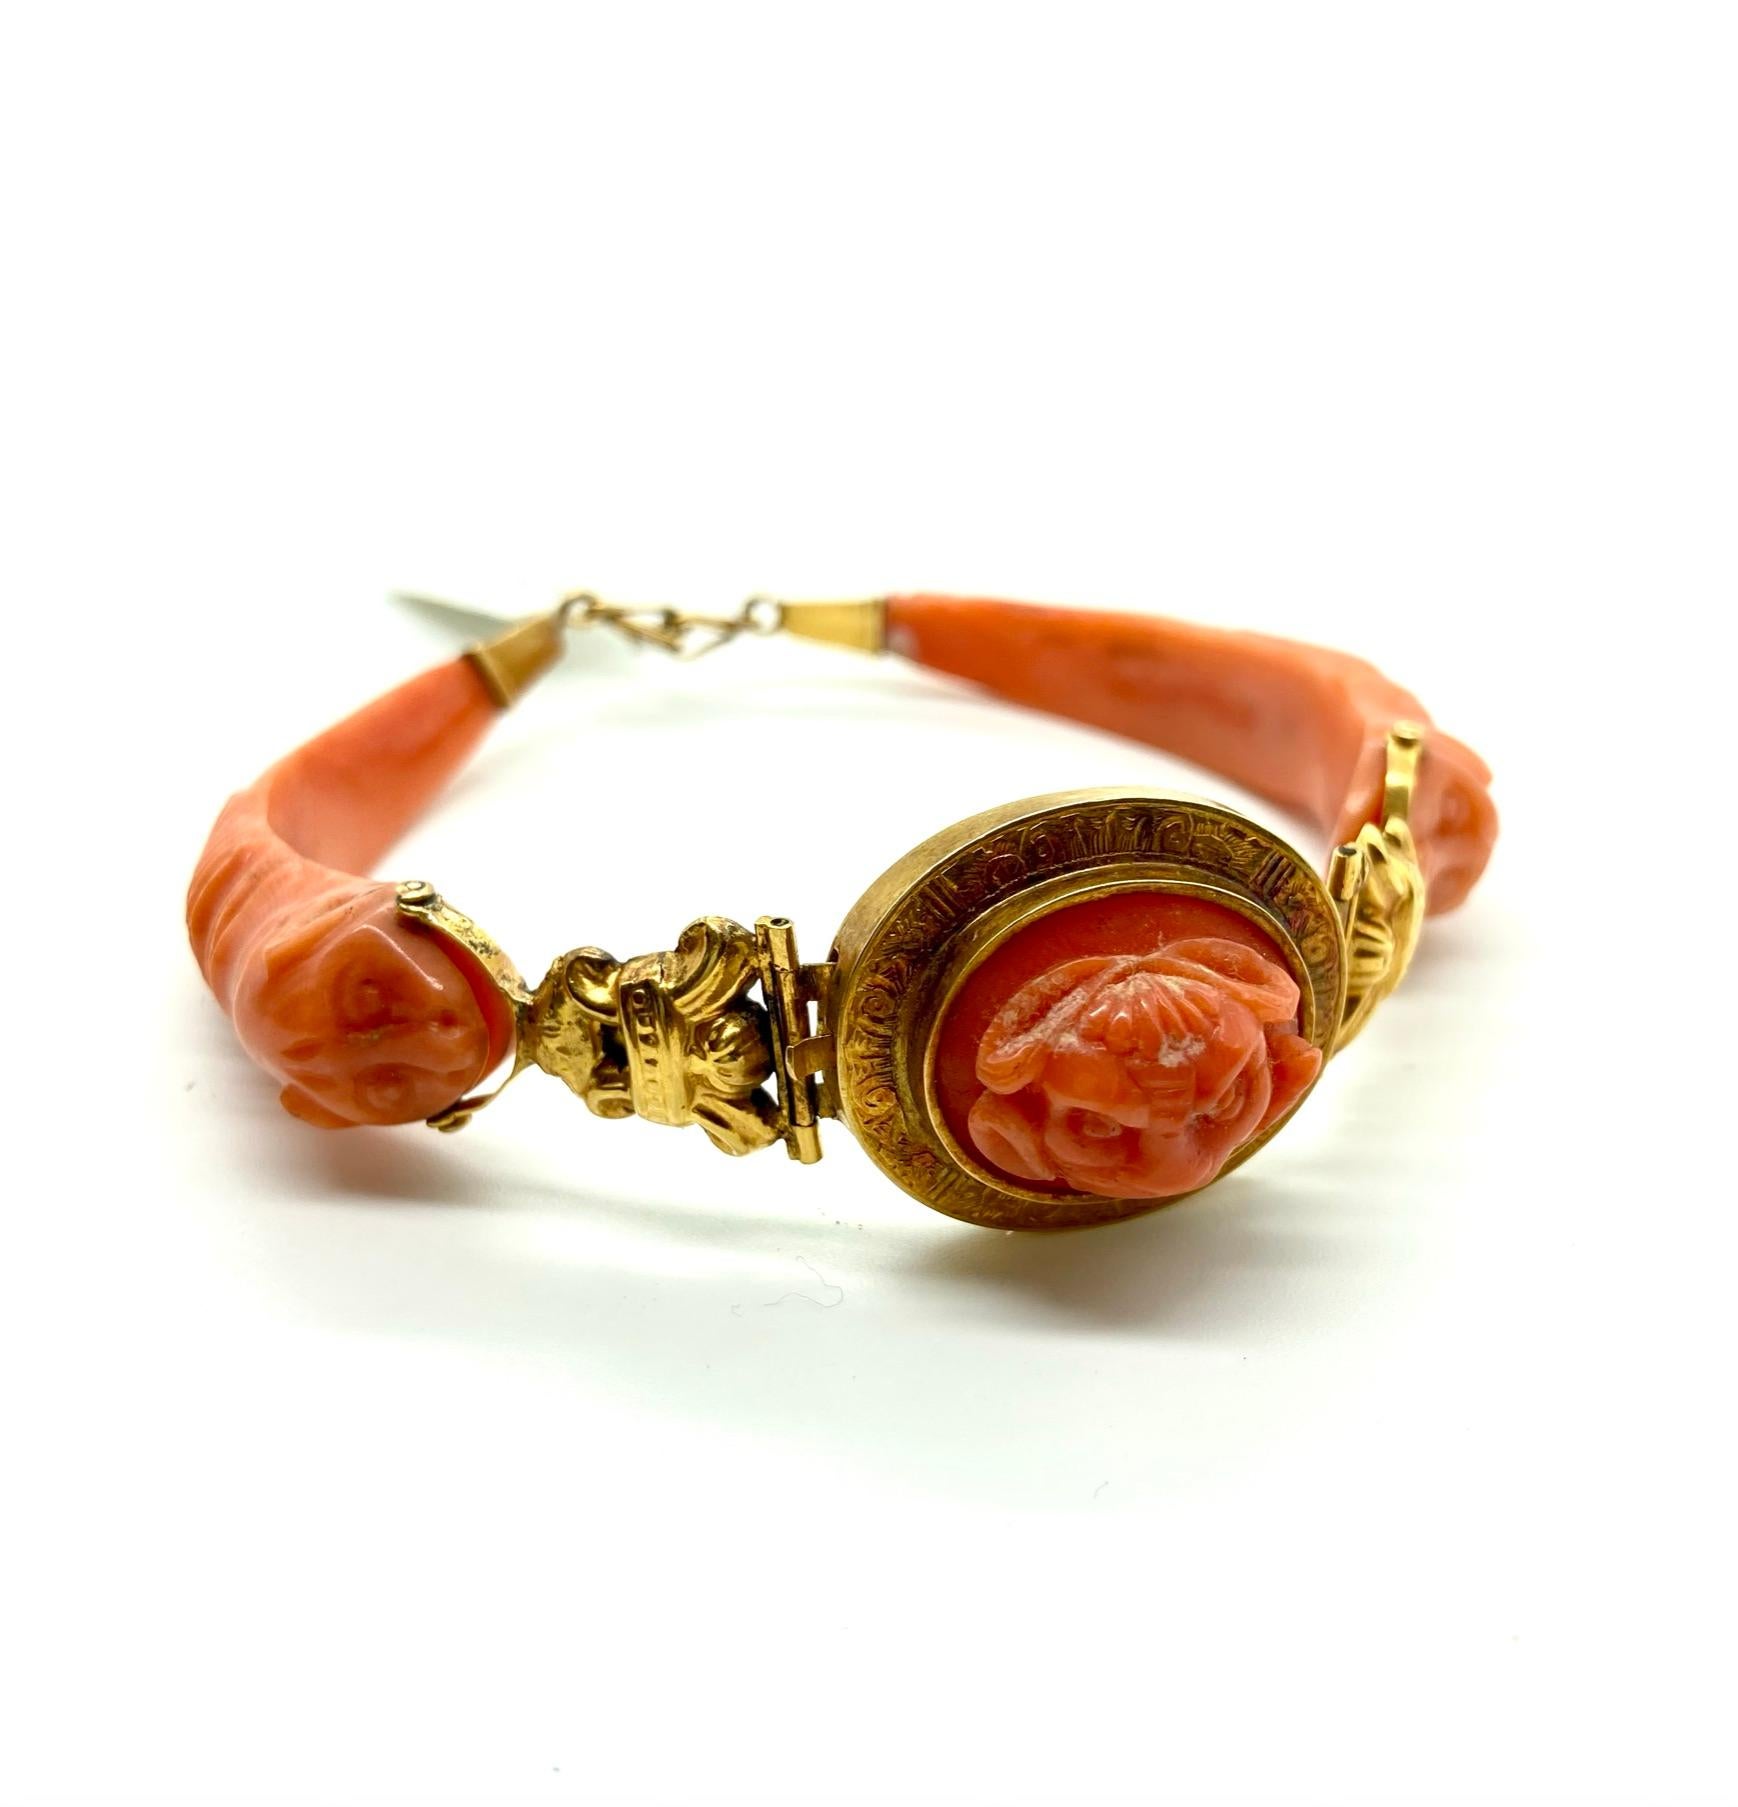 A beautiful carved coral and yellow gold bracelet from the 19th century. Made in Italy.